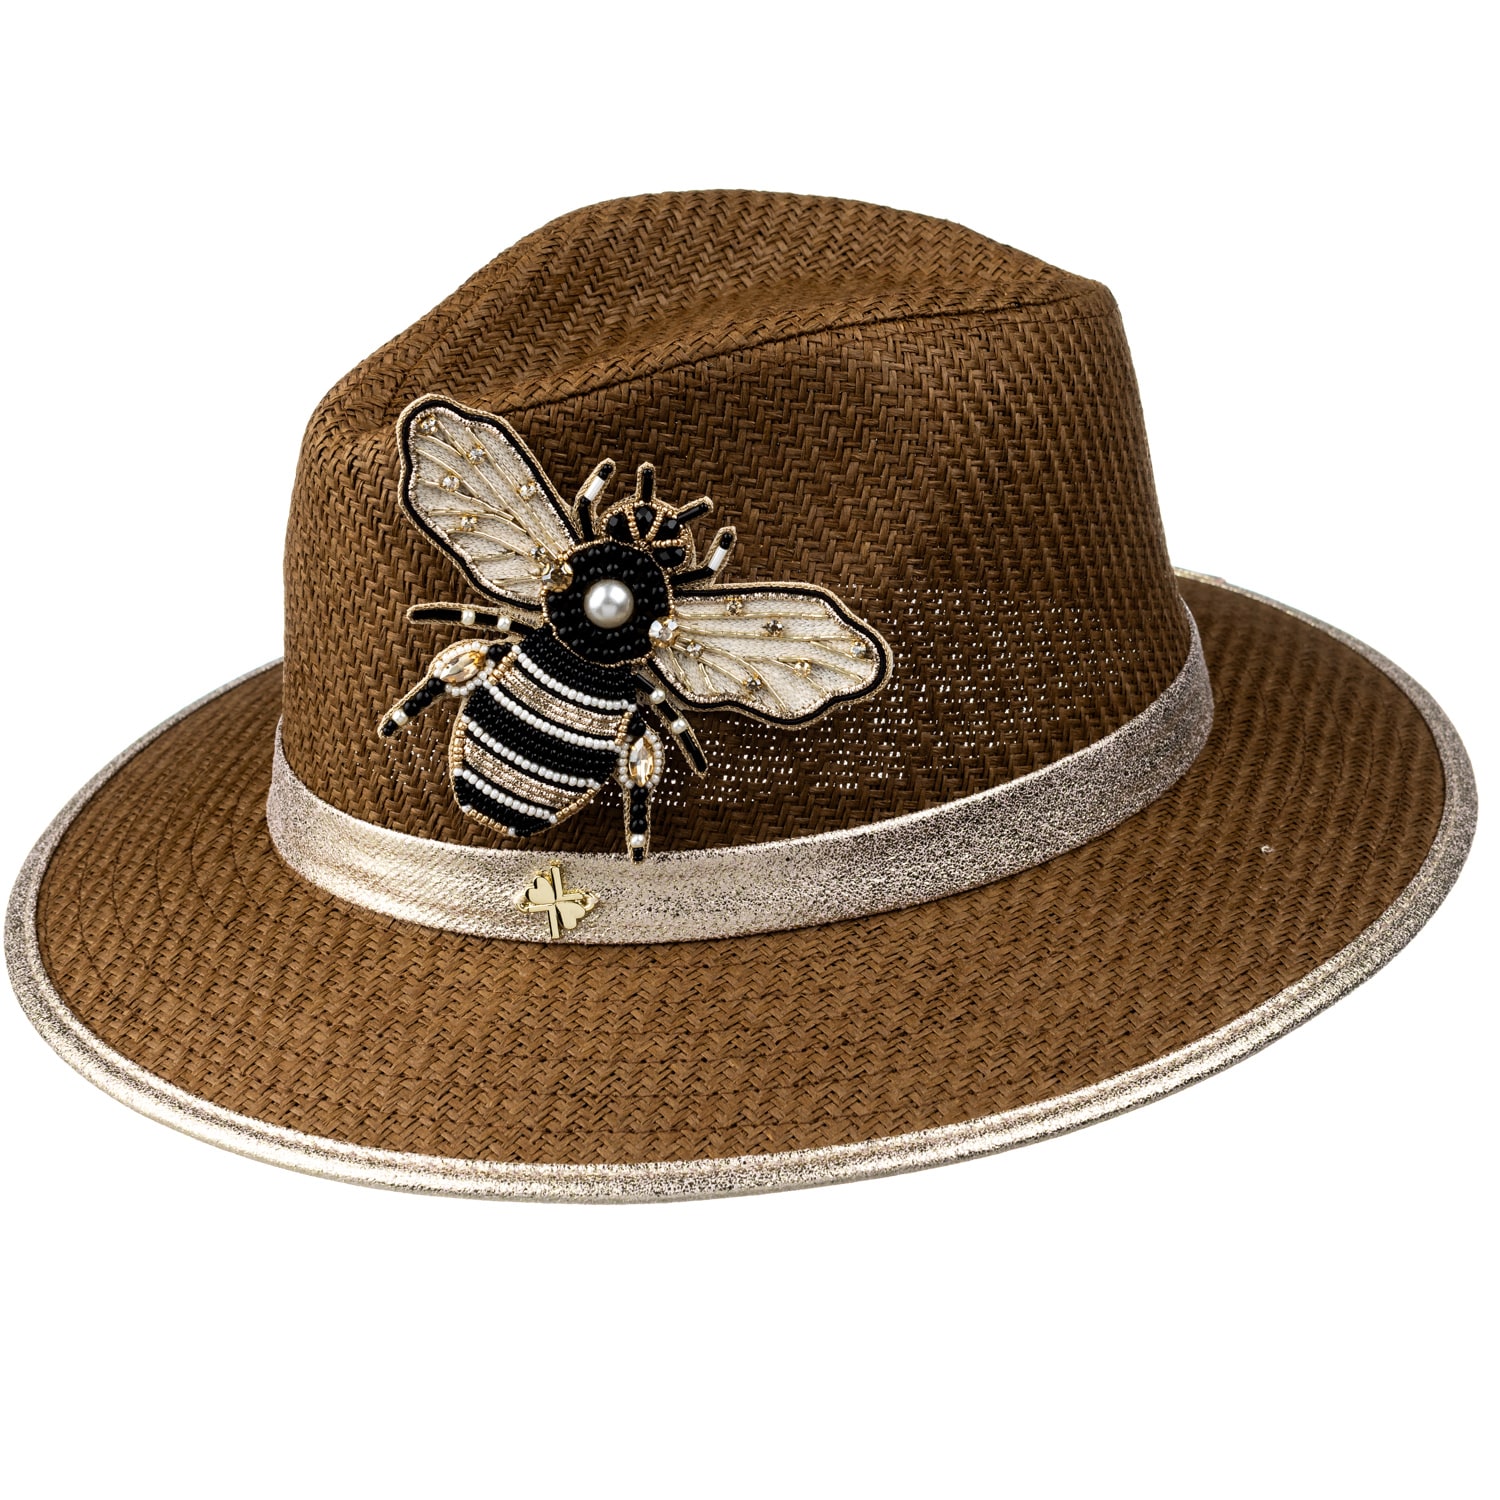 Women’s Brown Straw Woven Hat With Embellished Cream & Gold Bee Brooch - Caramel One Size Laines London